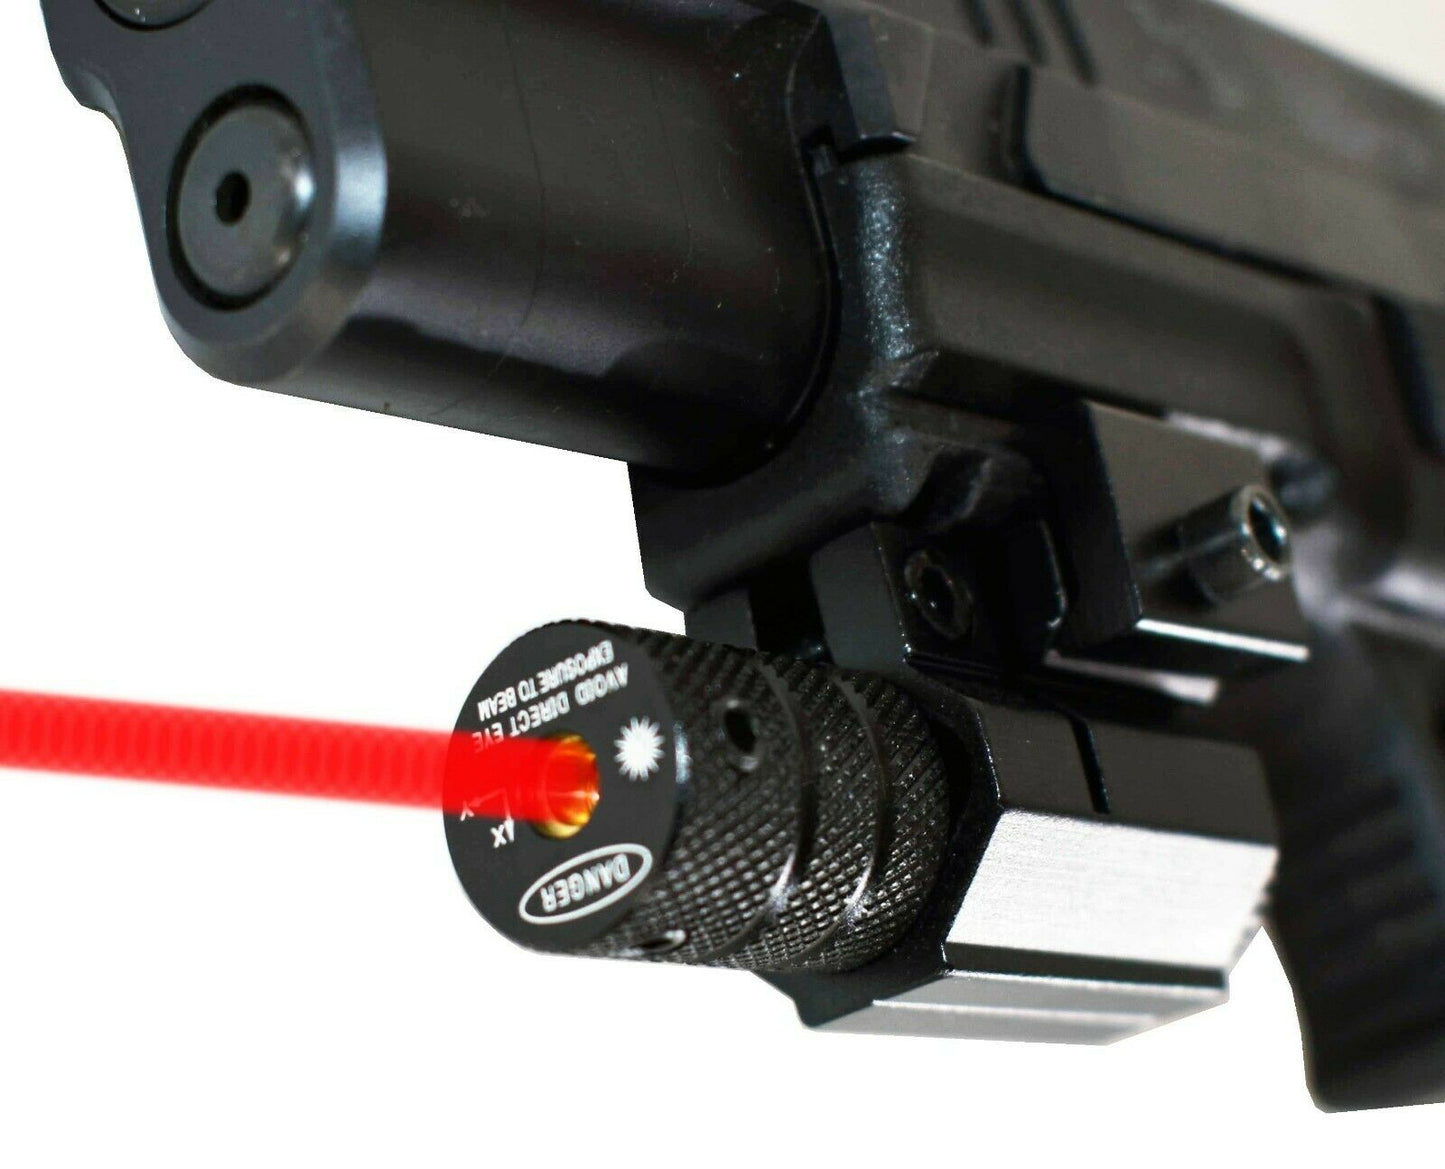 Trinity red dot laser sight for Sig Sauer p320 Xcarry Legion handgun tactical.